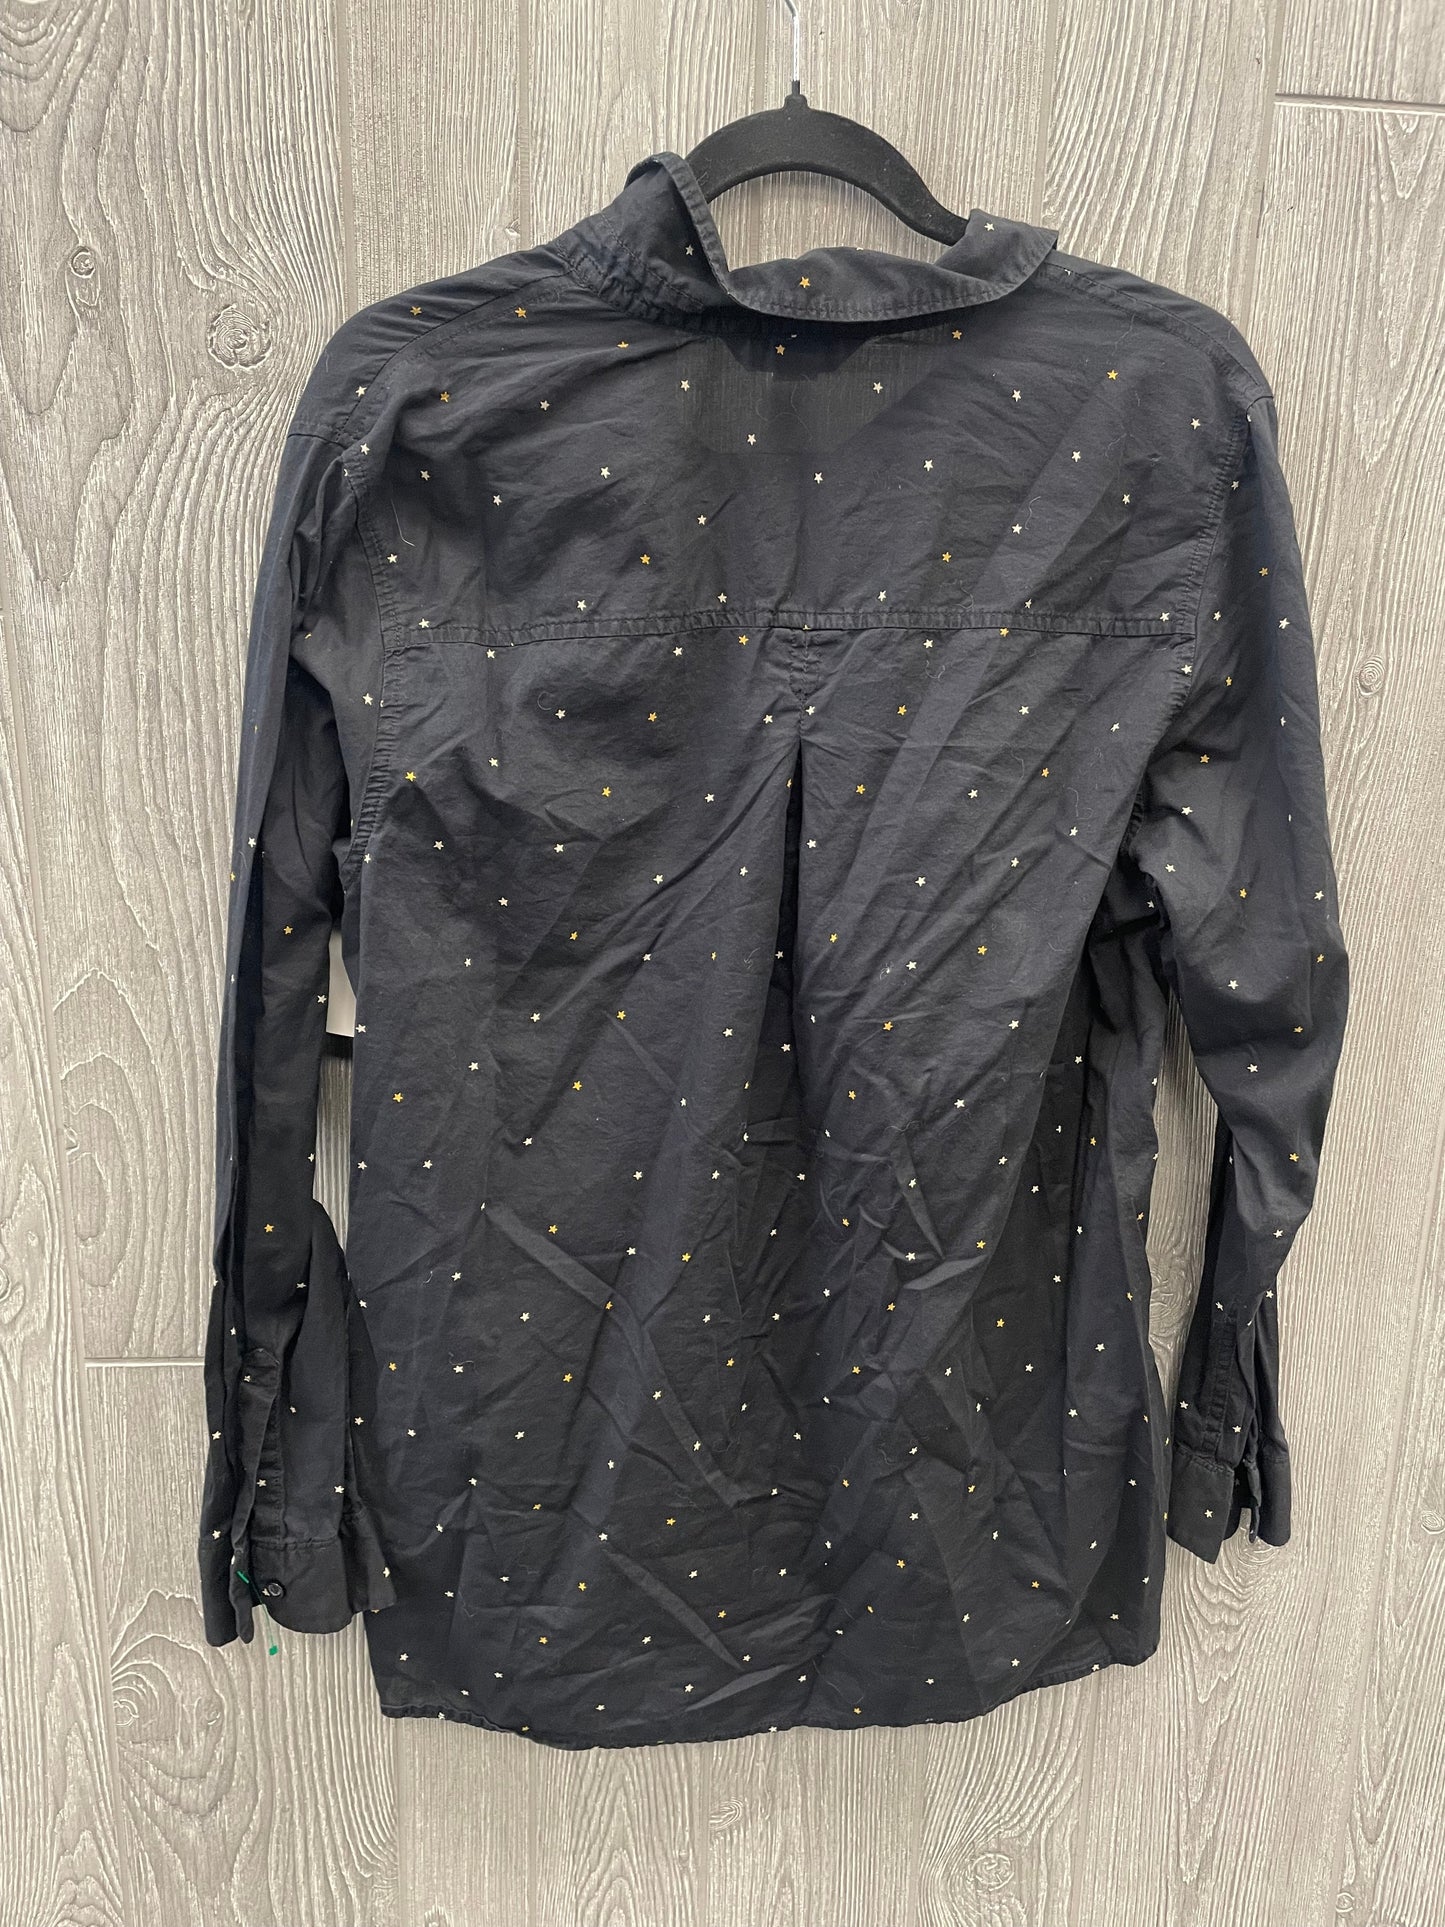 Black Top Long Sleeve Old Navy, Size Xl